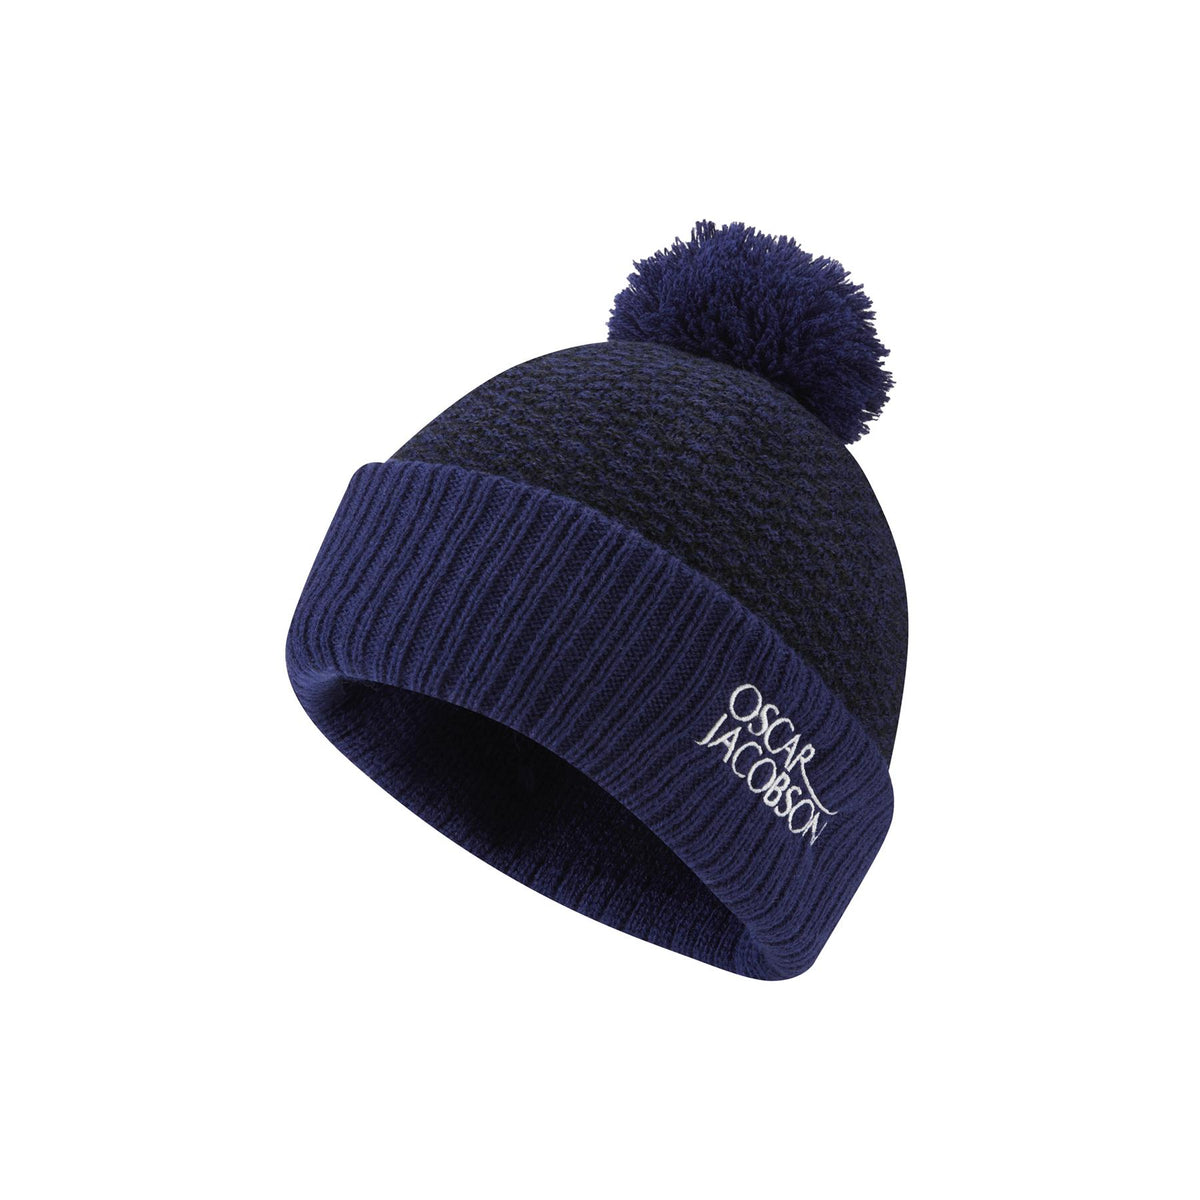 Tammis Knitted Bobble Hat